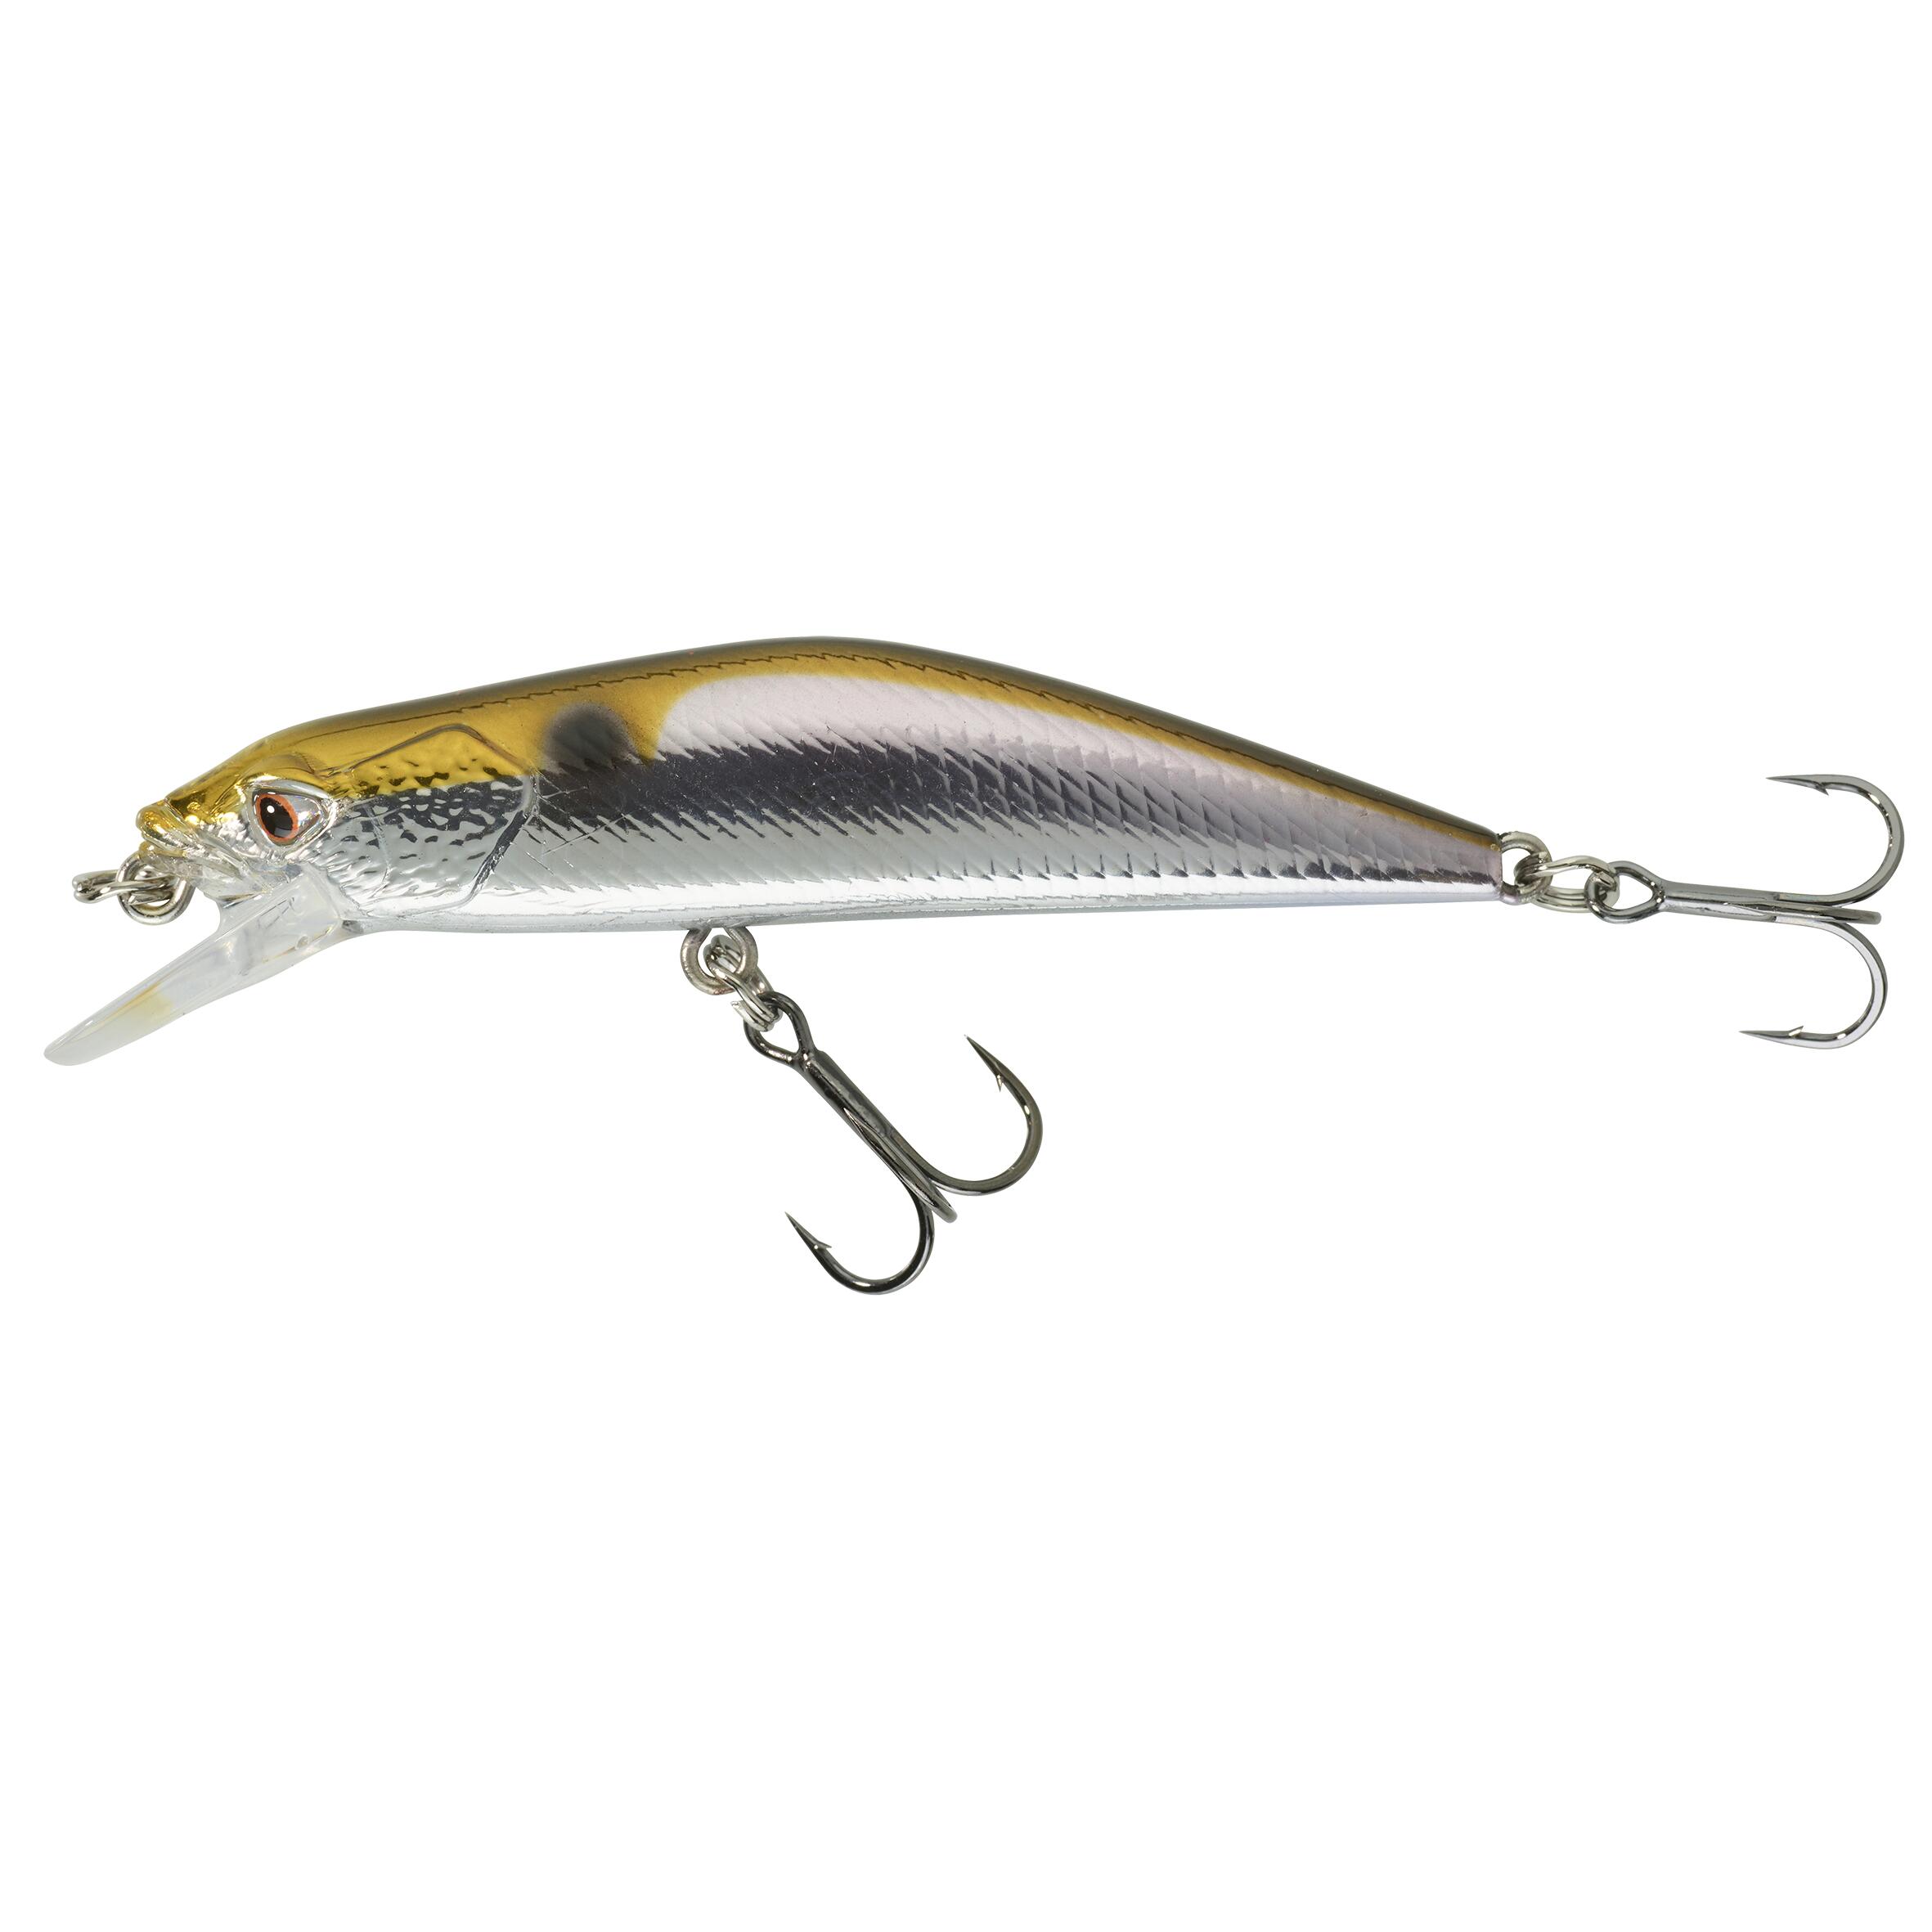 CAPERLAN MINNOW HARD LURE FOR TROUT MNWFS US 70 FRY